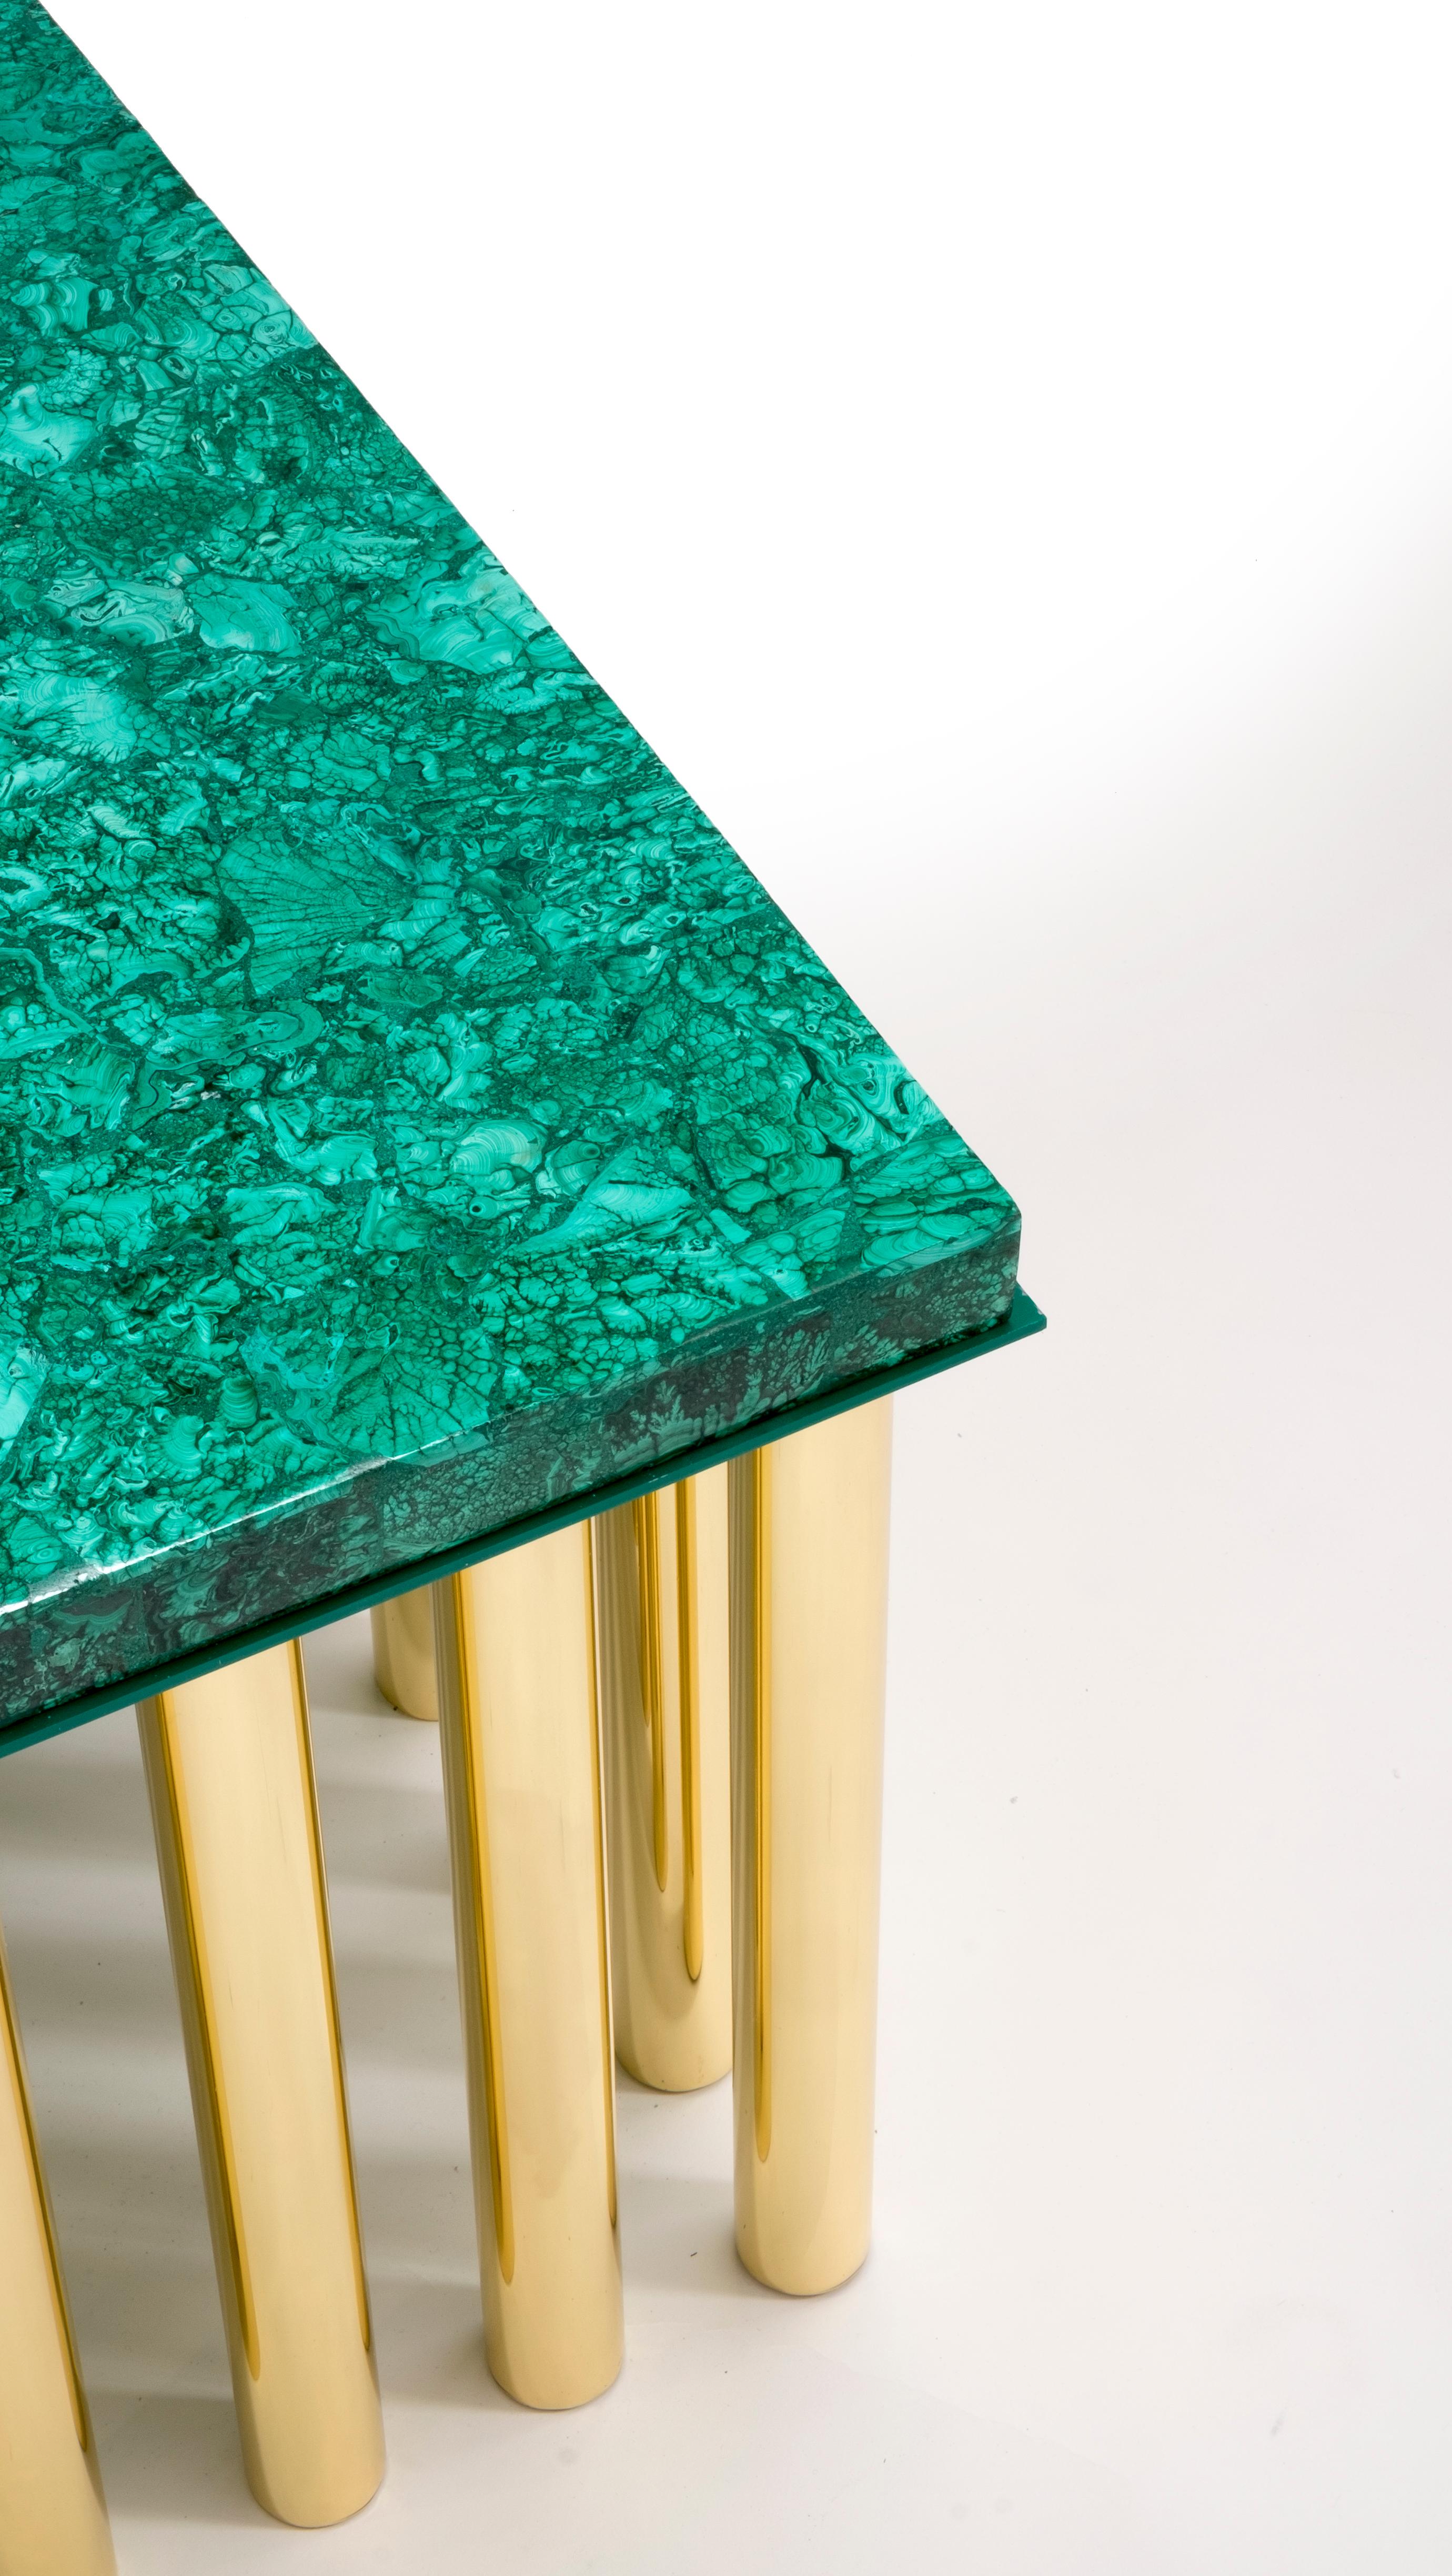 Stalactite model coffee table, 32 polished brass legs, rectangular Malachite table top designed by Studio Superego for Superego Editions.

Biography
Superego editions was born in 2006, performing a constant activity of research in decorative arts by